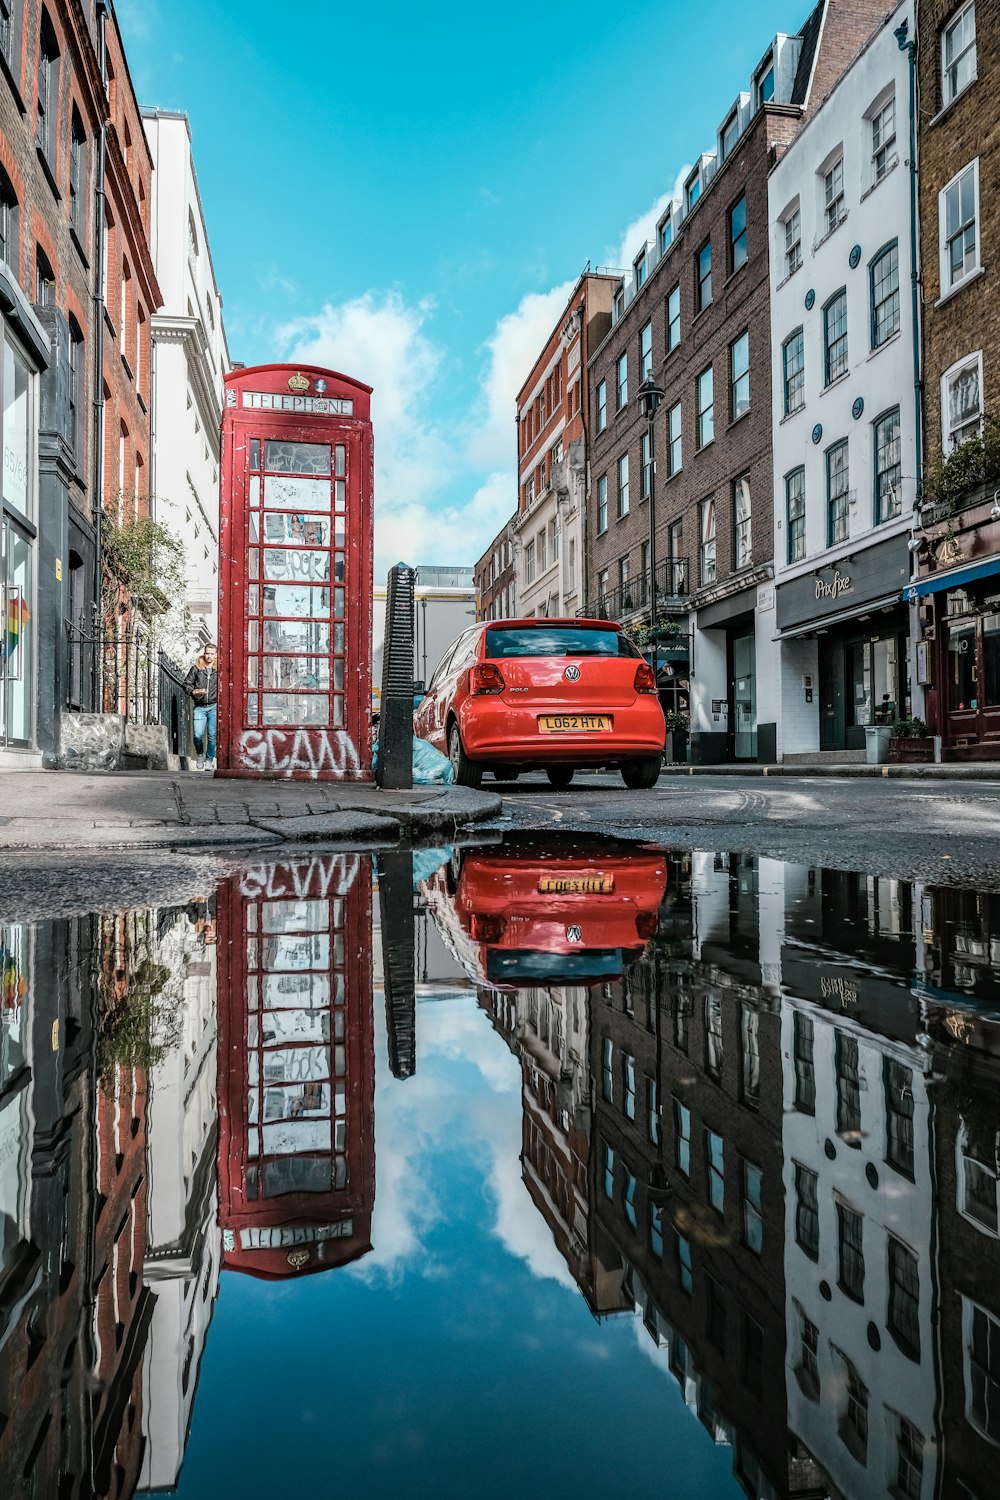 a red car parked in front of a red phone booth